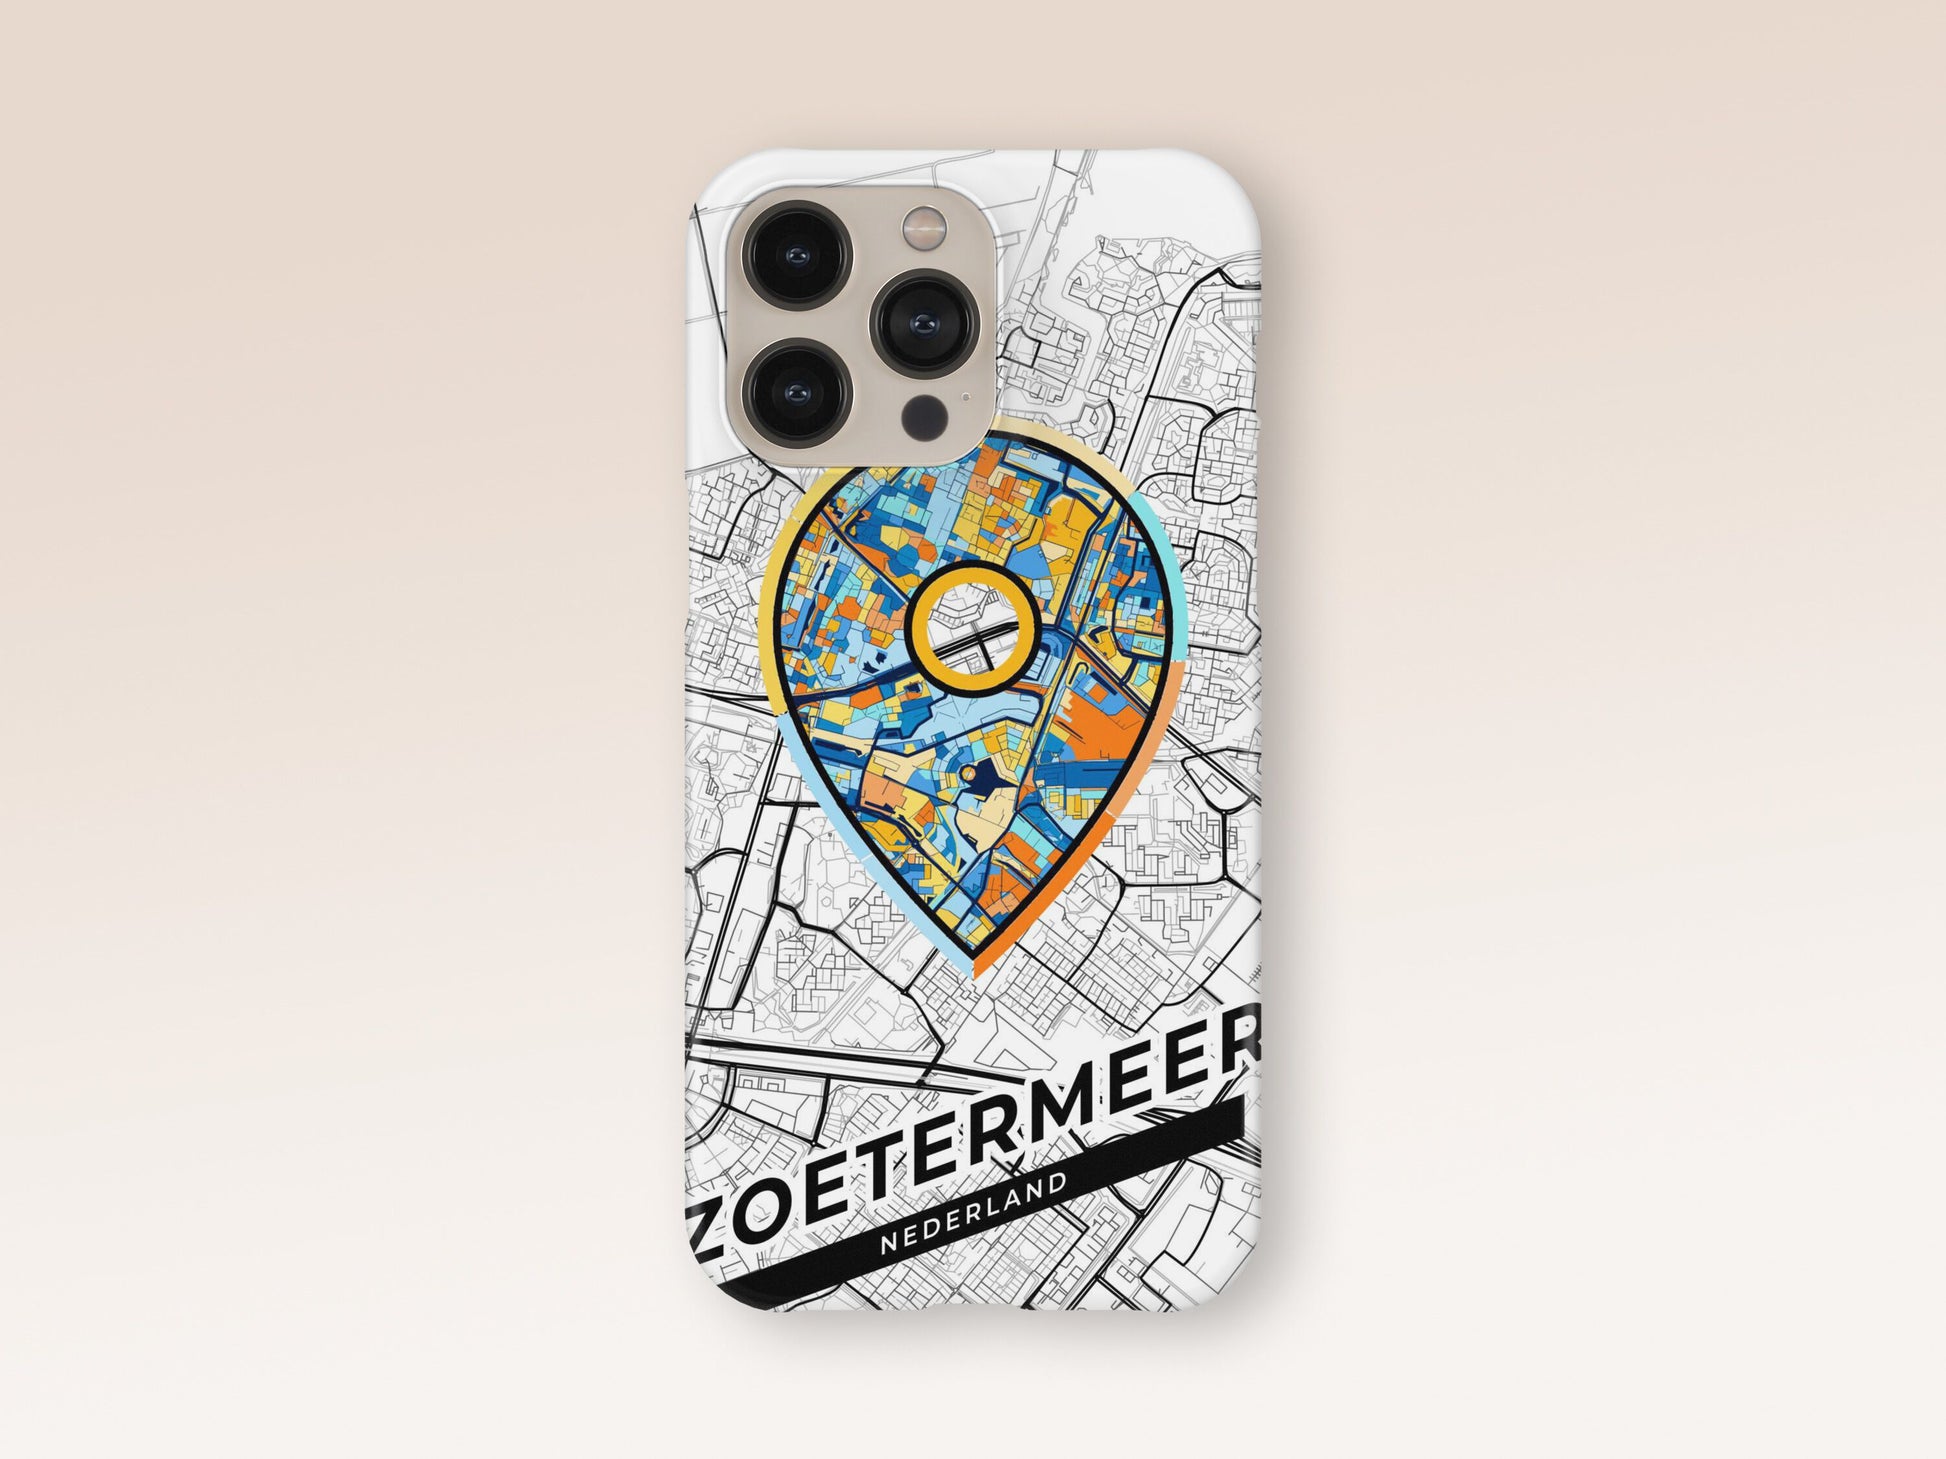 Zoetermeer Netherlands slim phone case with colorful icon 1